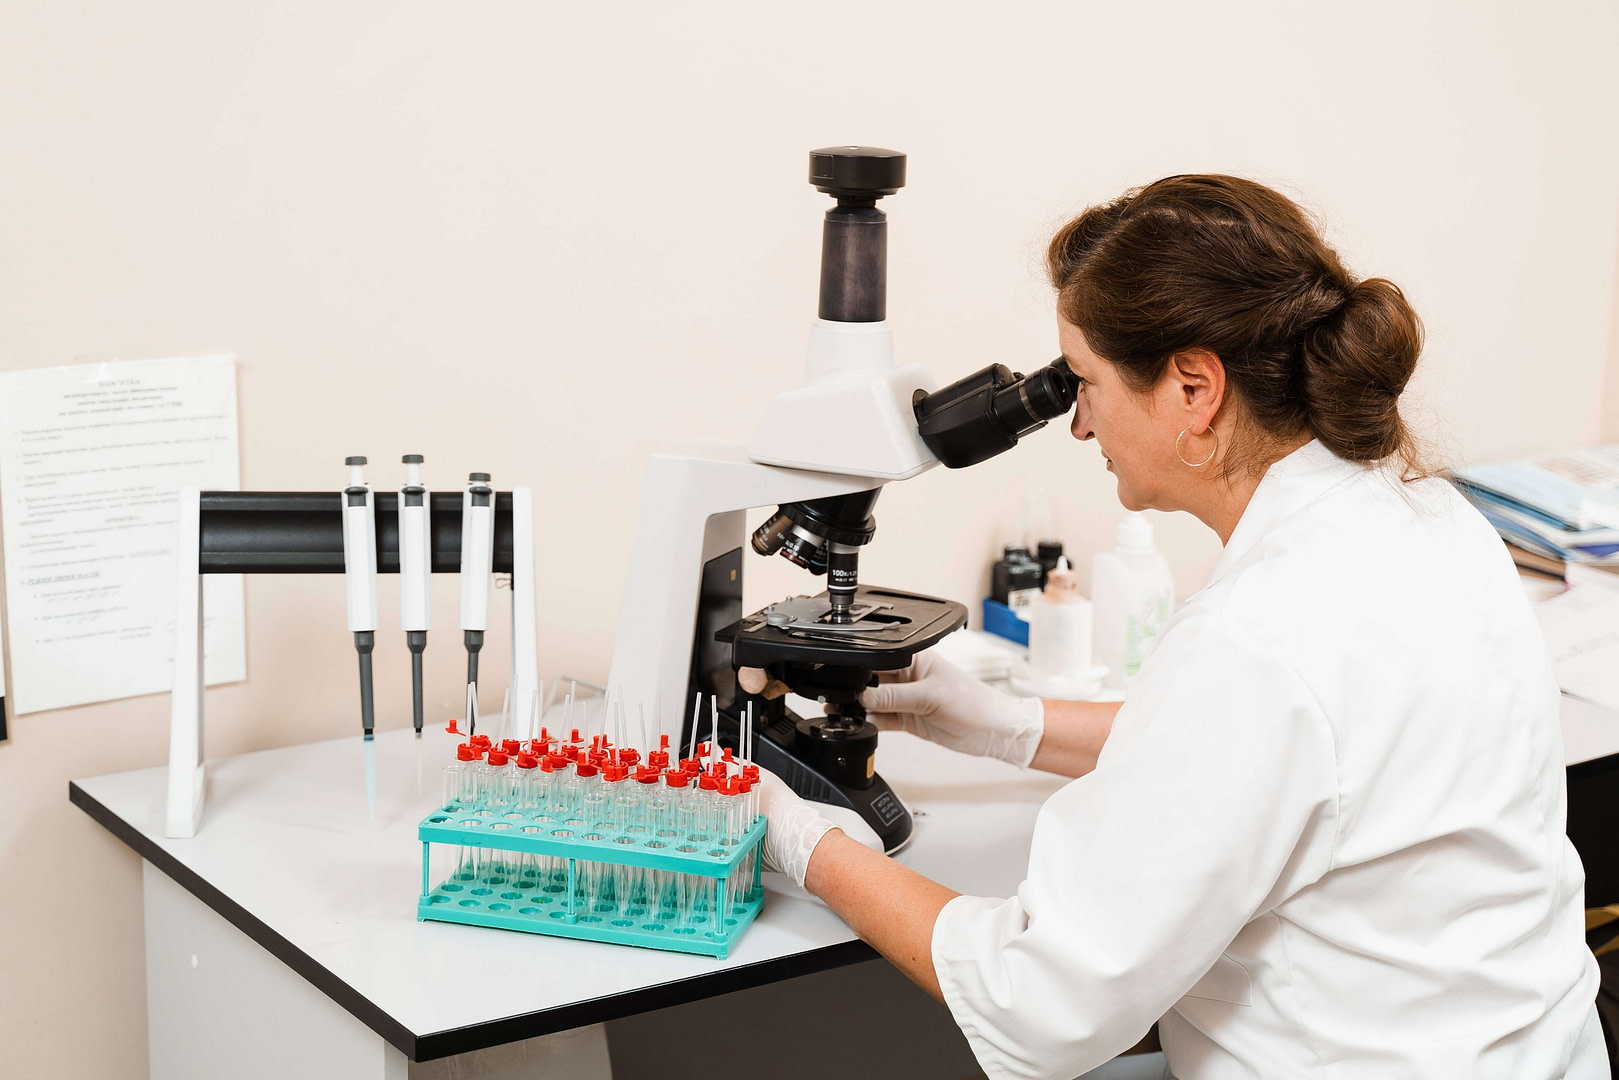 A woman in a lab coat is sat at a bench. She is looking at samples on a microscope.